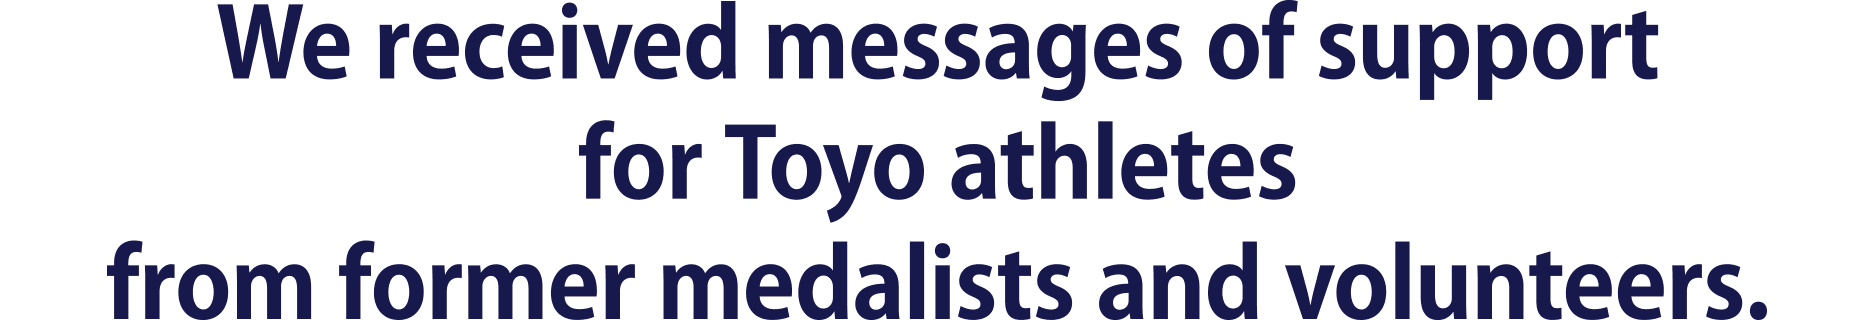 We received messages of support for Toyo athletes from former medalists and volunteers.